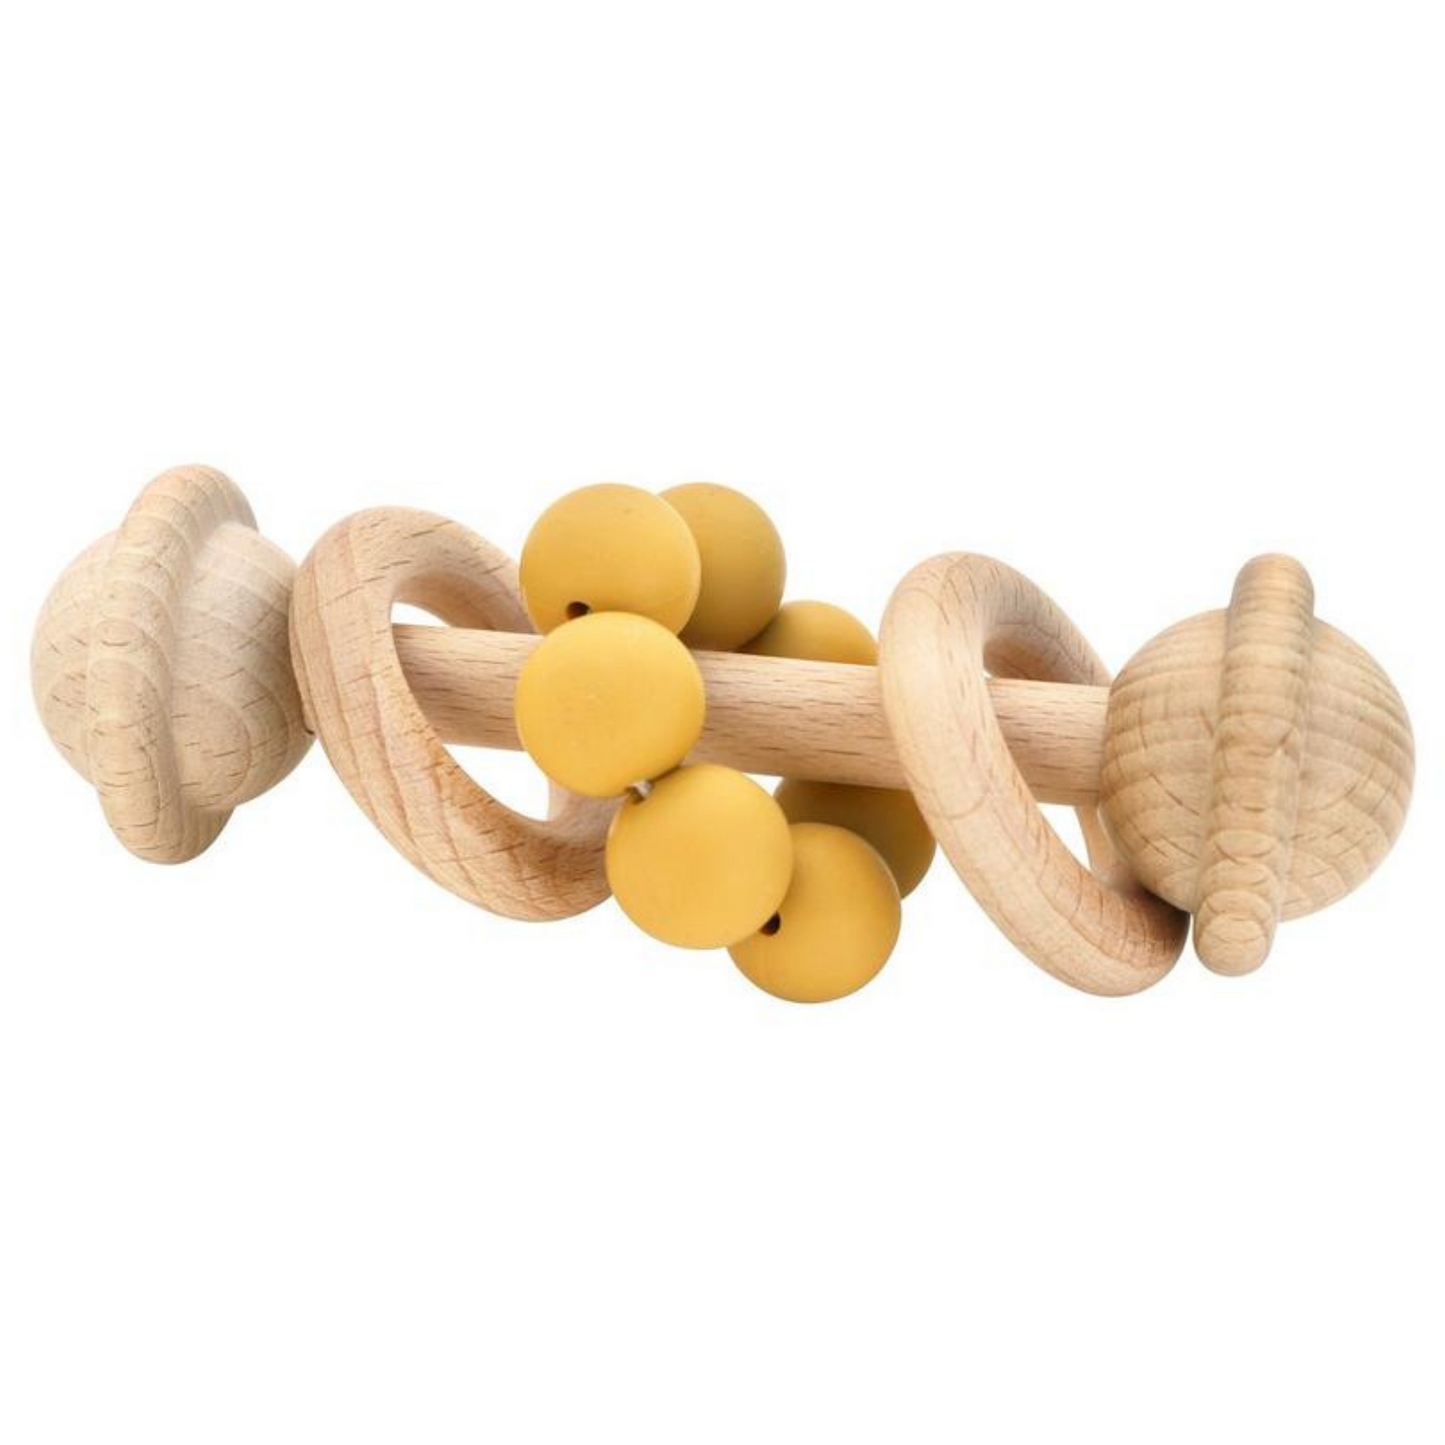 Eco-Friendly Rattle Teether Toy Turmeric